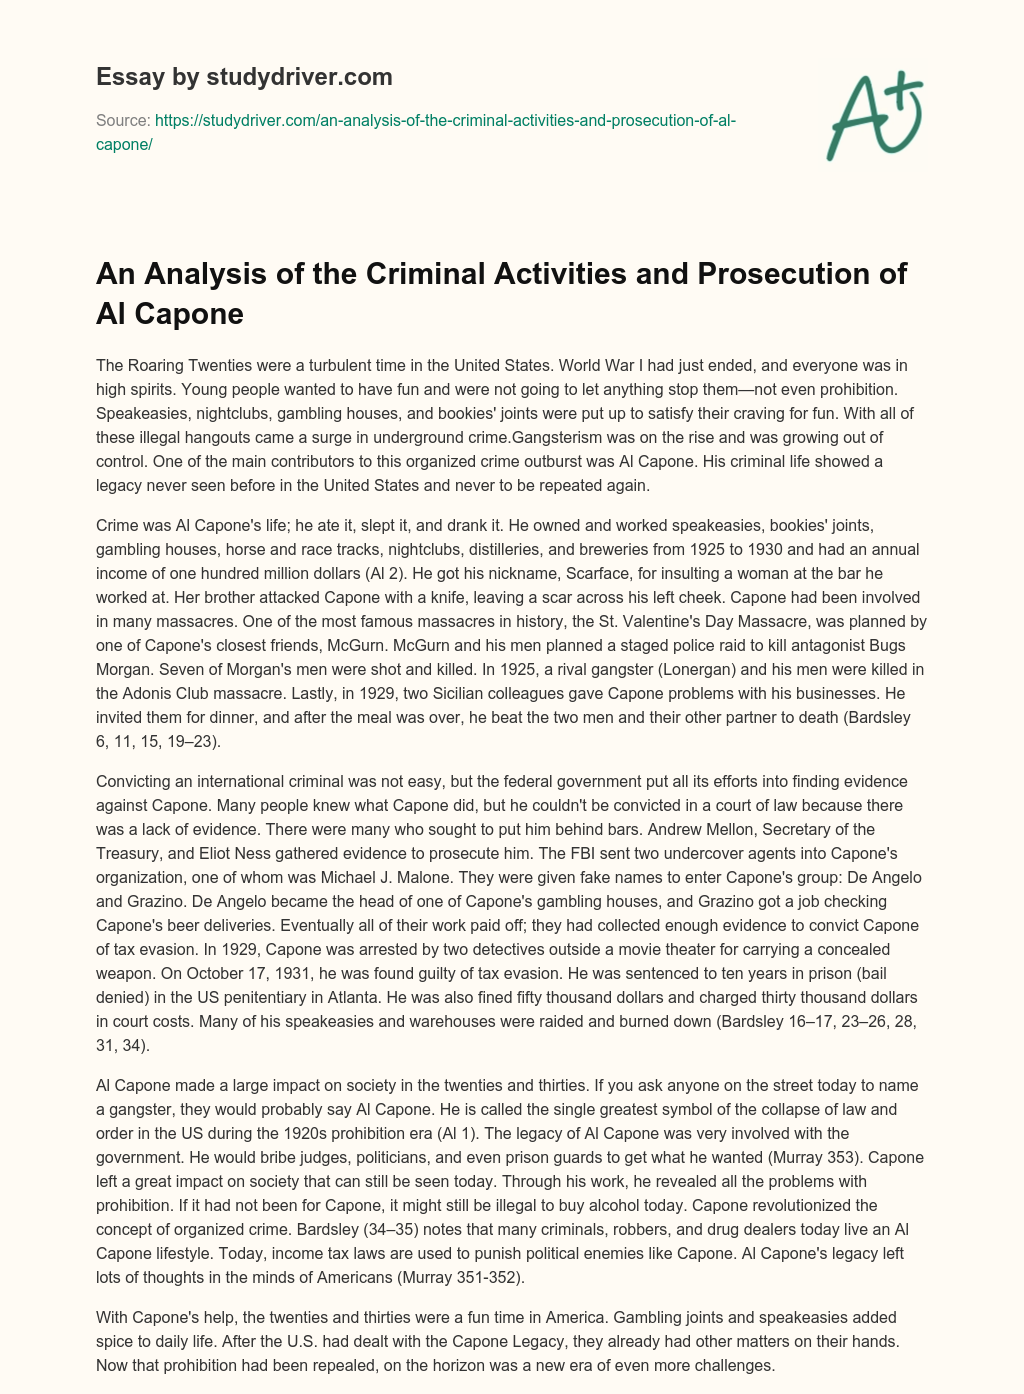 An Analysis of the Criminal Activities and Prosecution of Al Capone essay